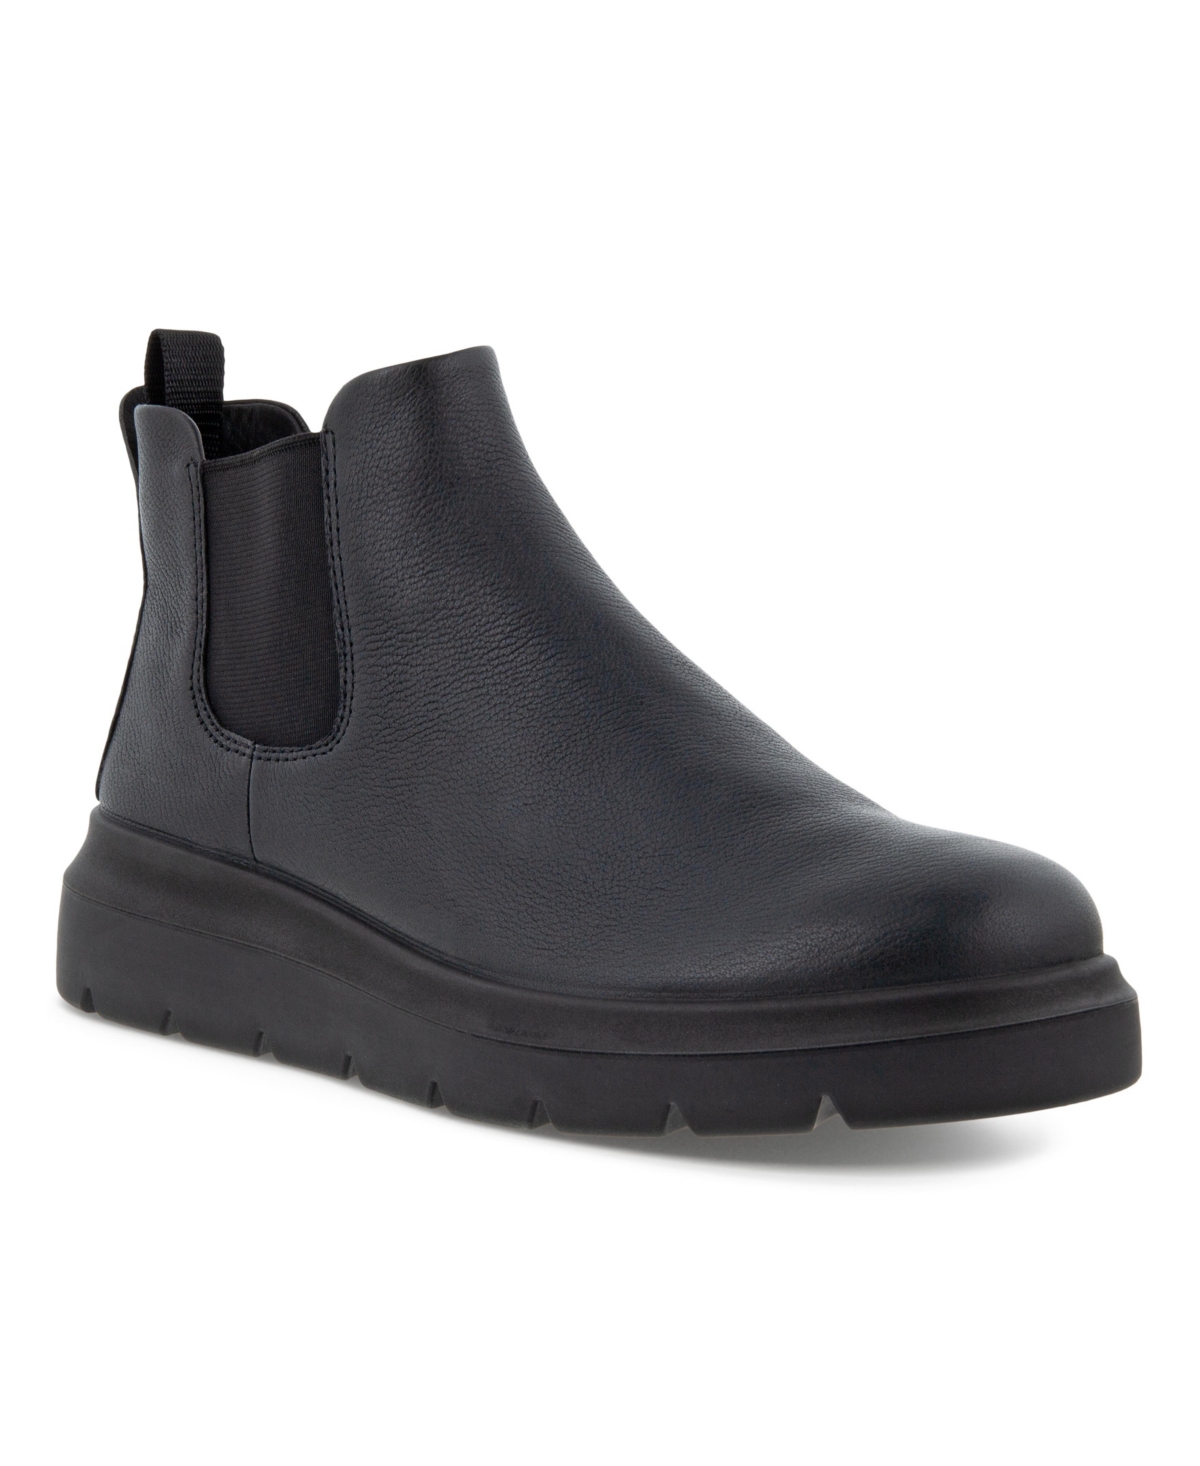 UPC 194890905016 product image for Ecco Women's Nouvelle Chelsea Nubuck Leather Boot Women's Shoes | upcitemdb.com